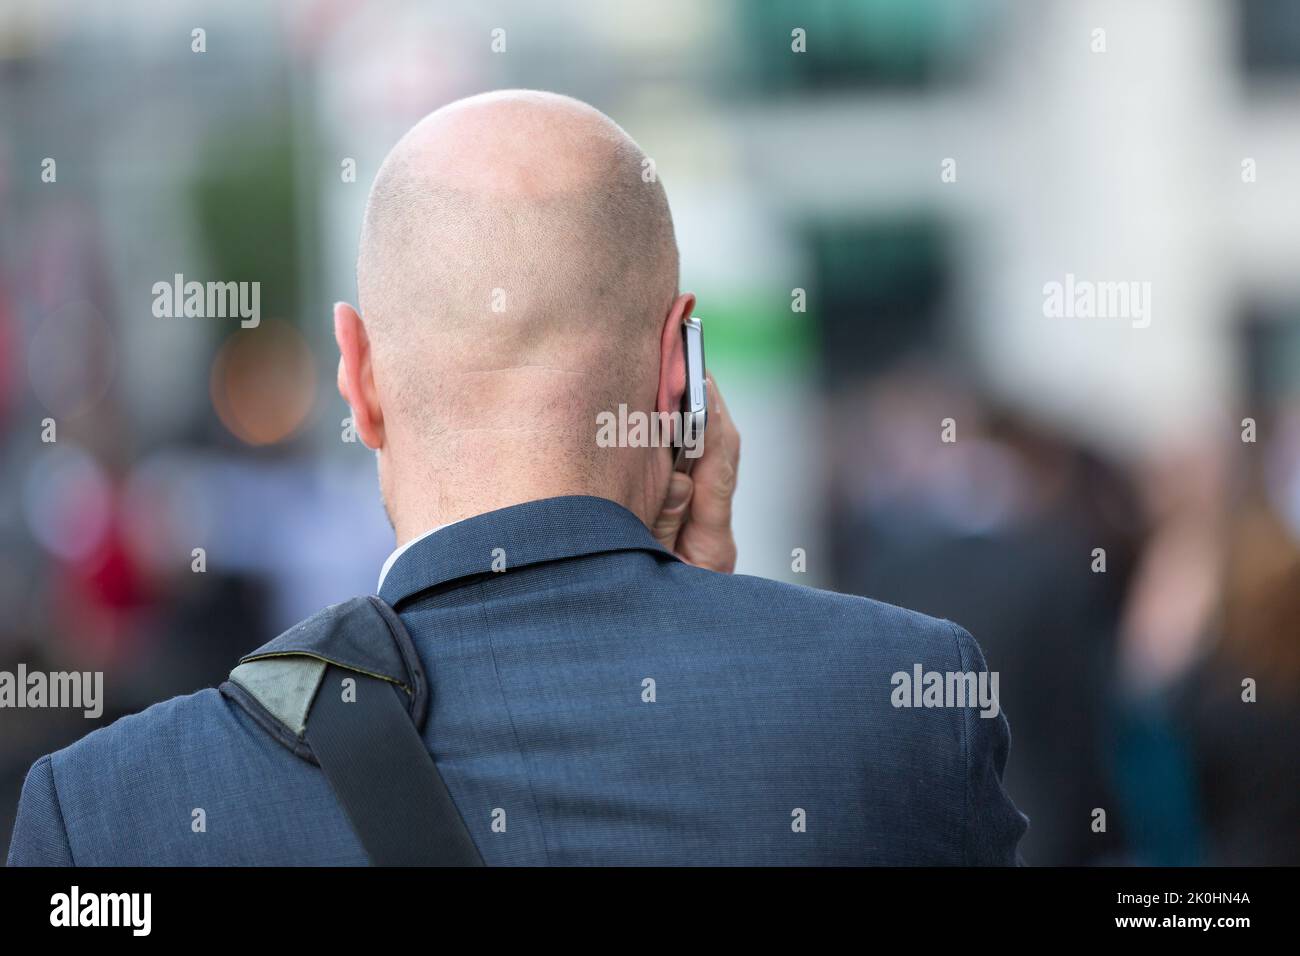 businessman with mobile phone on his ear makes a call Stock Photo